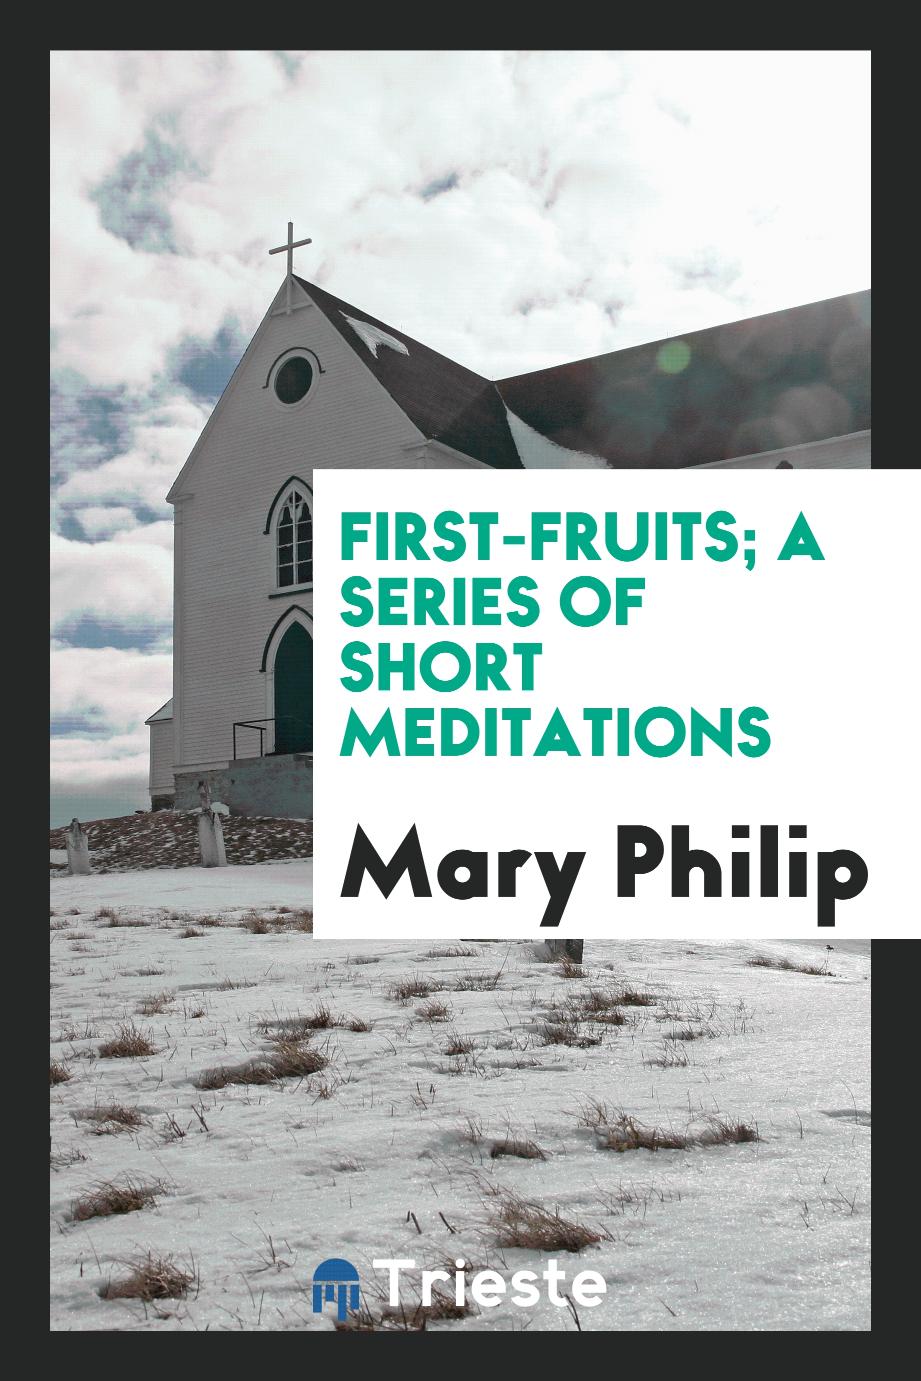 First-fruits; a series of short meditations